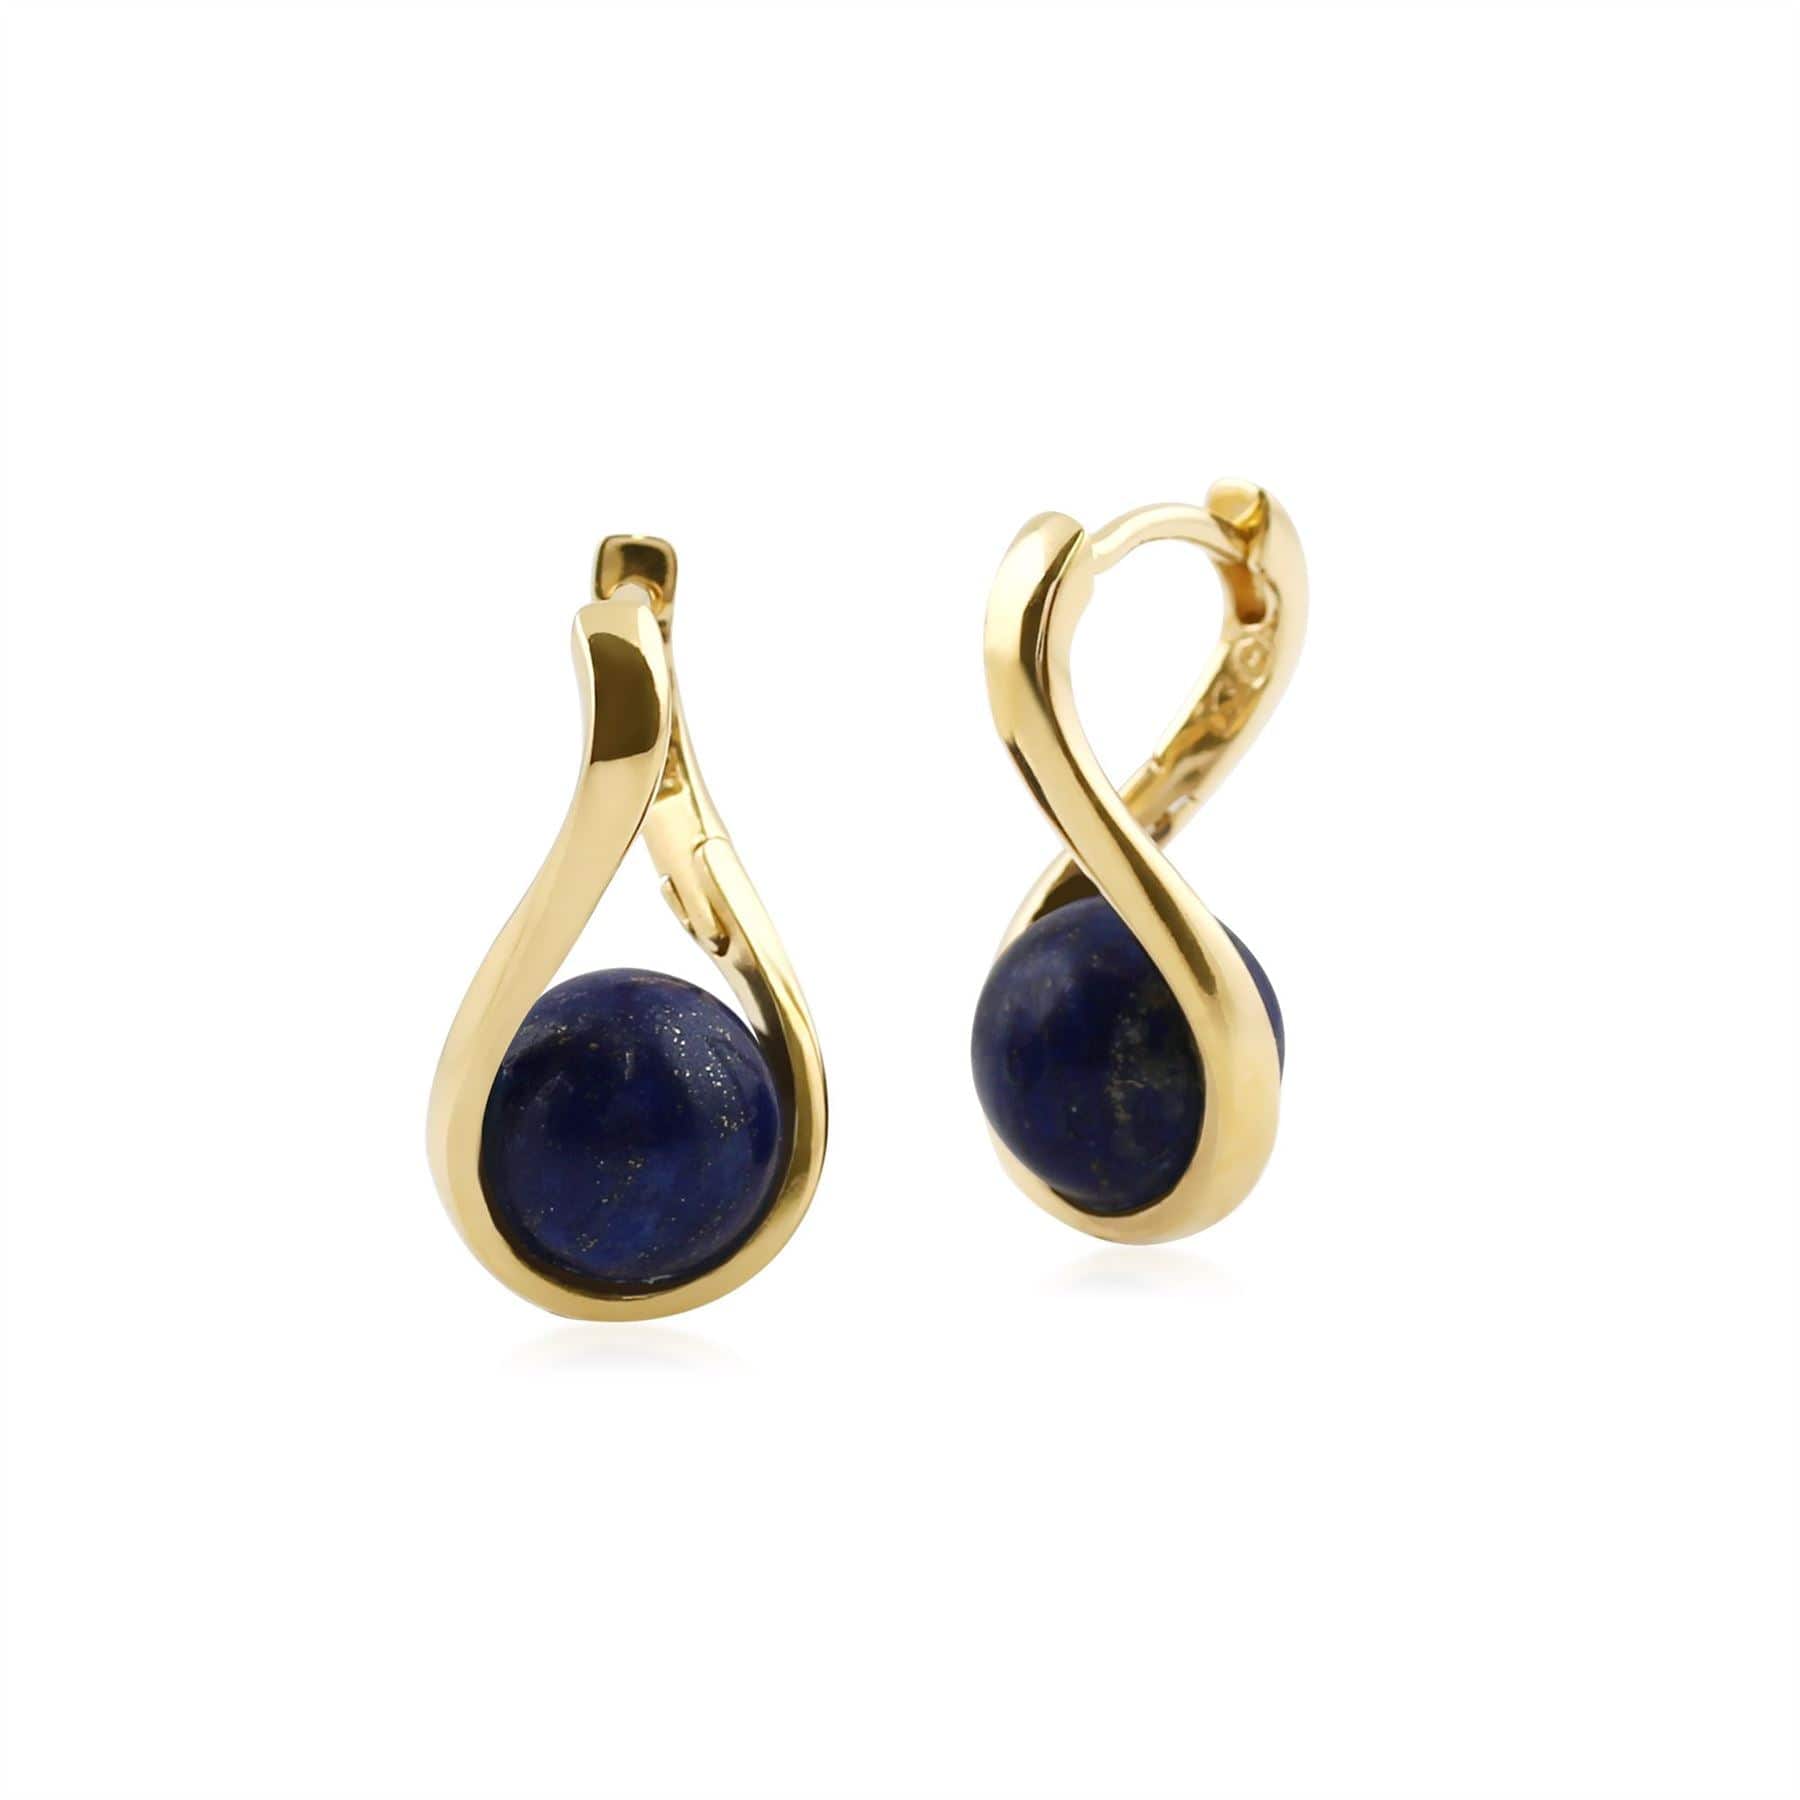 Kosmos Lapis Lazuli Orb Earrings in Yellow Gold Plated Sterling Silver - Gemondo